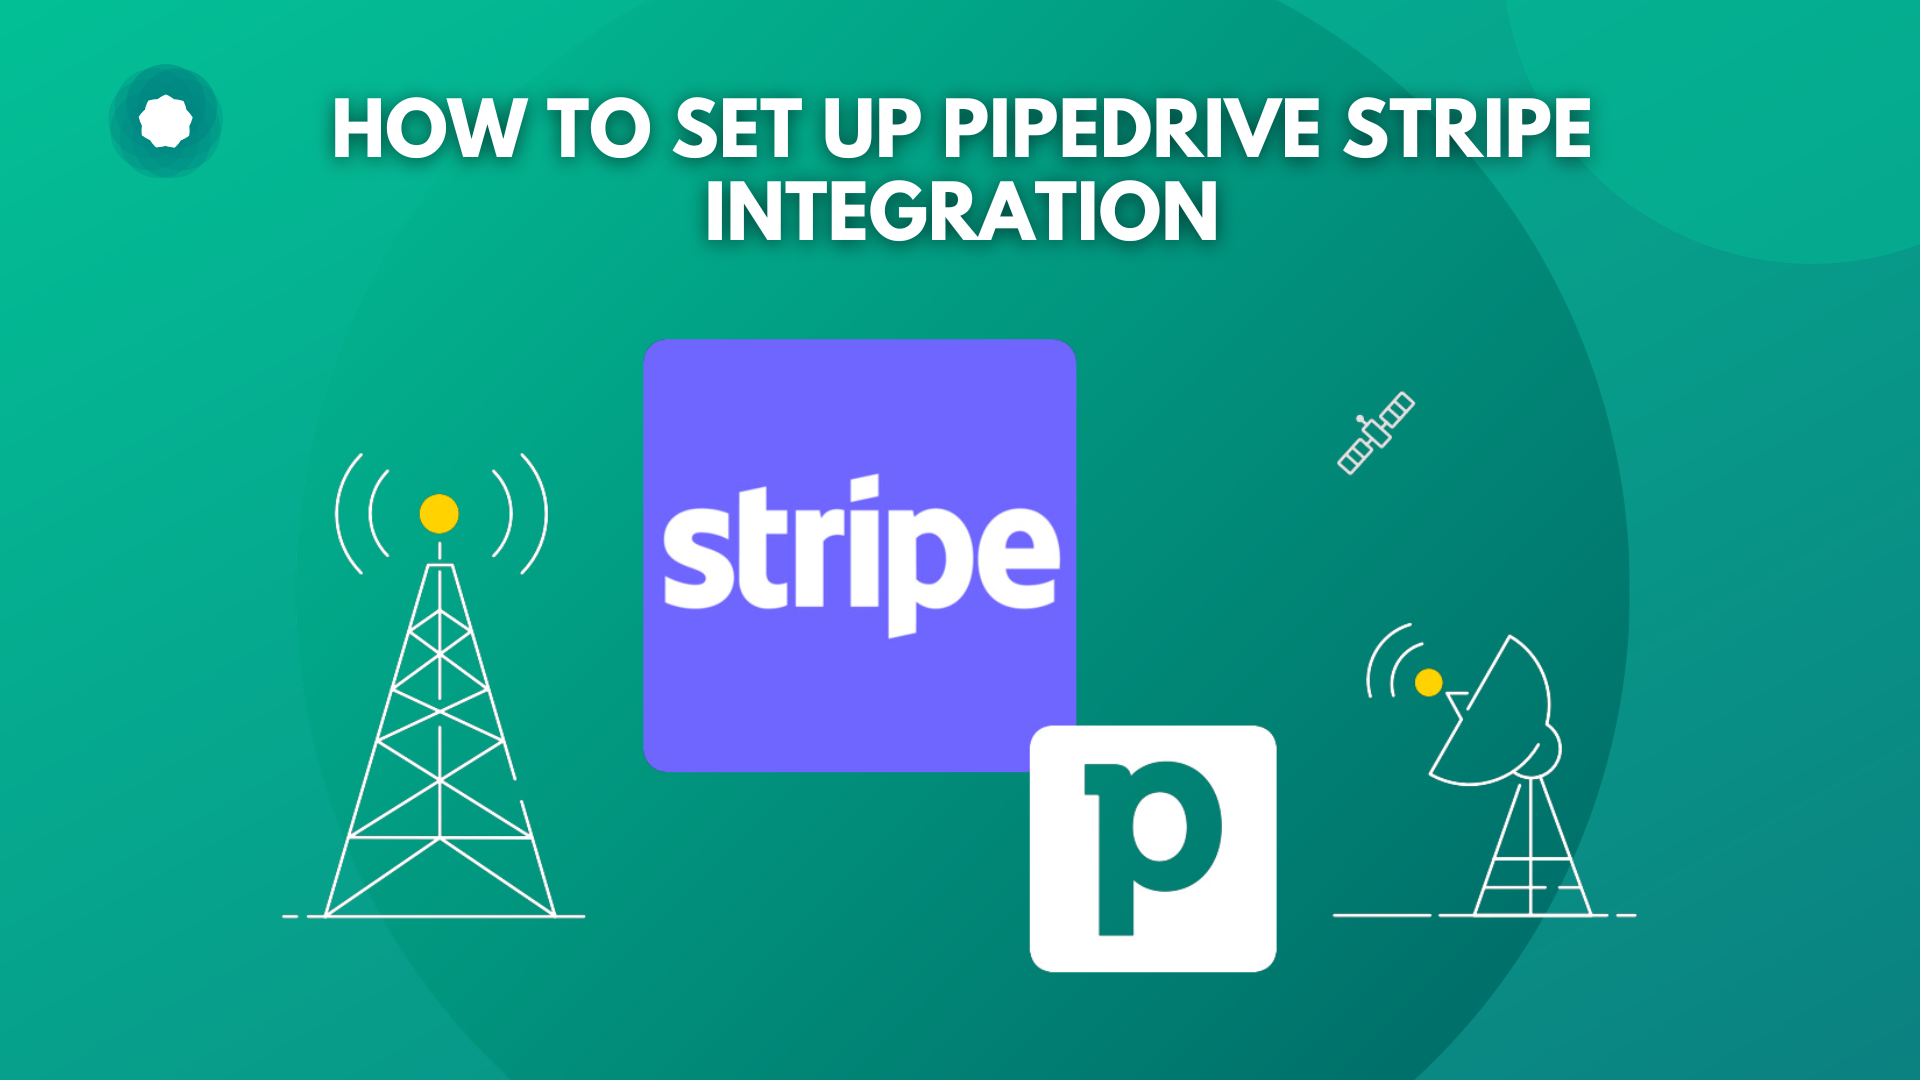 Optimize Sales with Pipedrive Stripe Integration